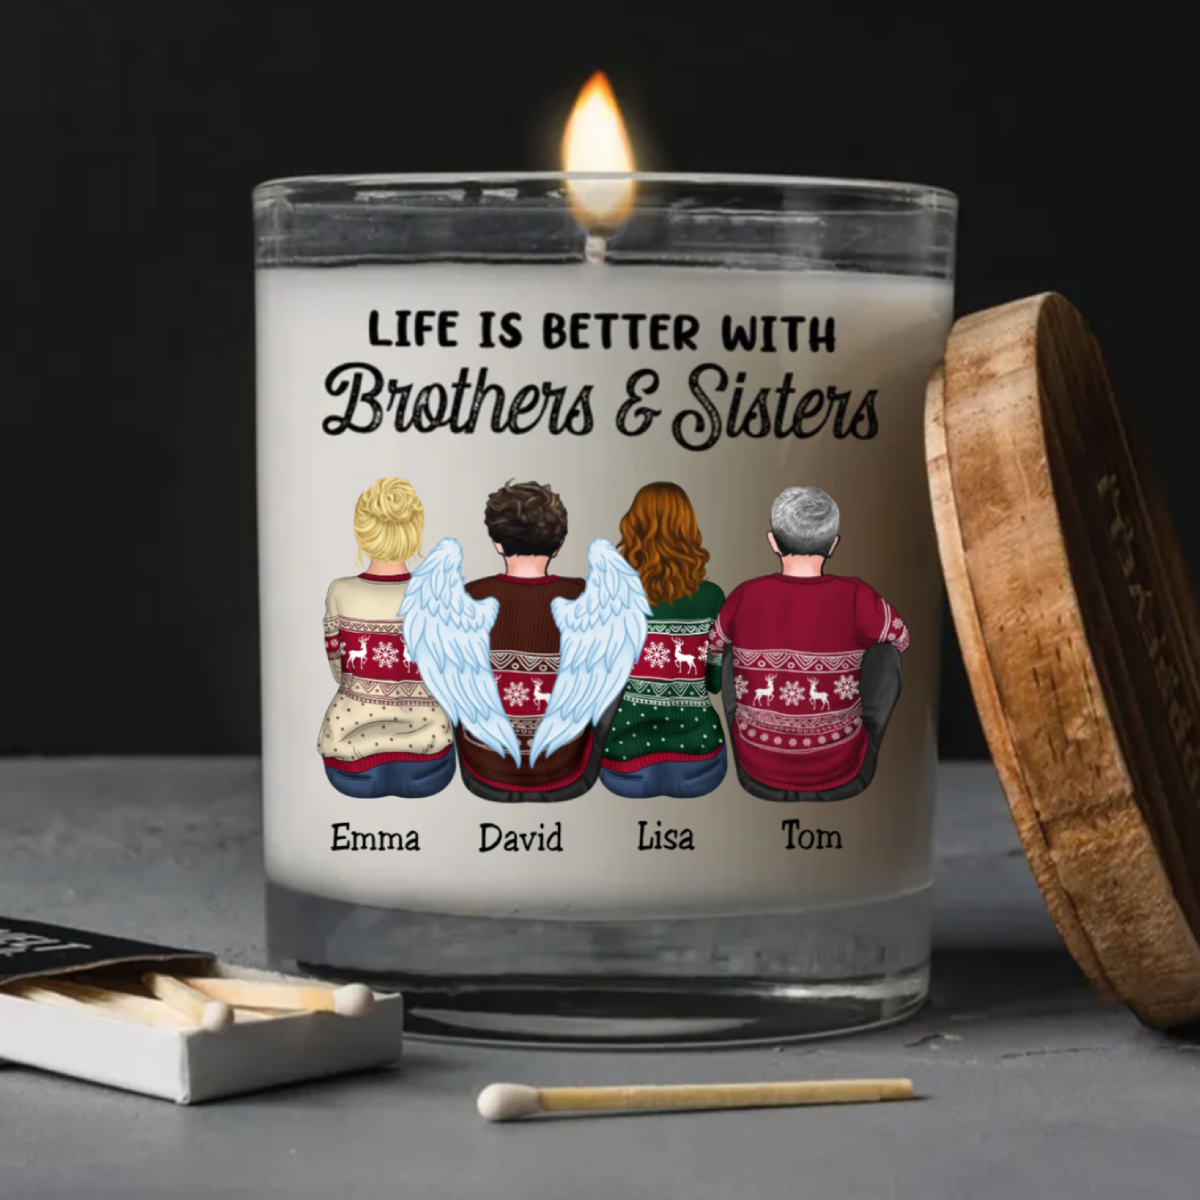 Brothers & Sisters - Life Is Better With Brothers & Sisters - Personalized Glass Candle